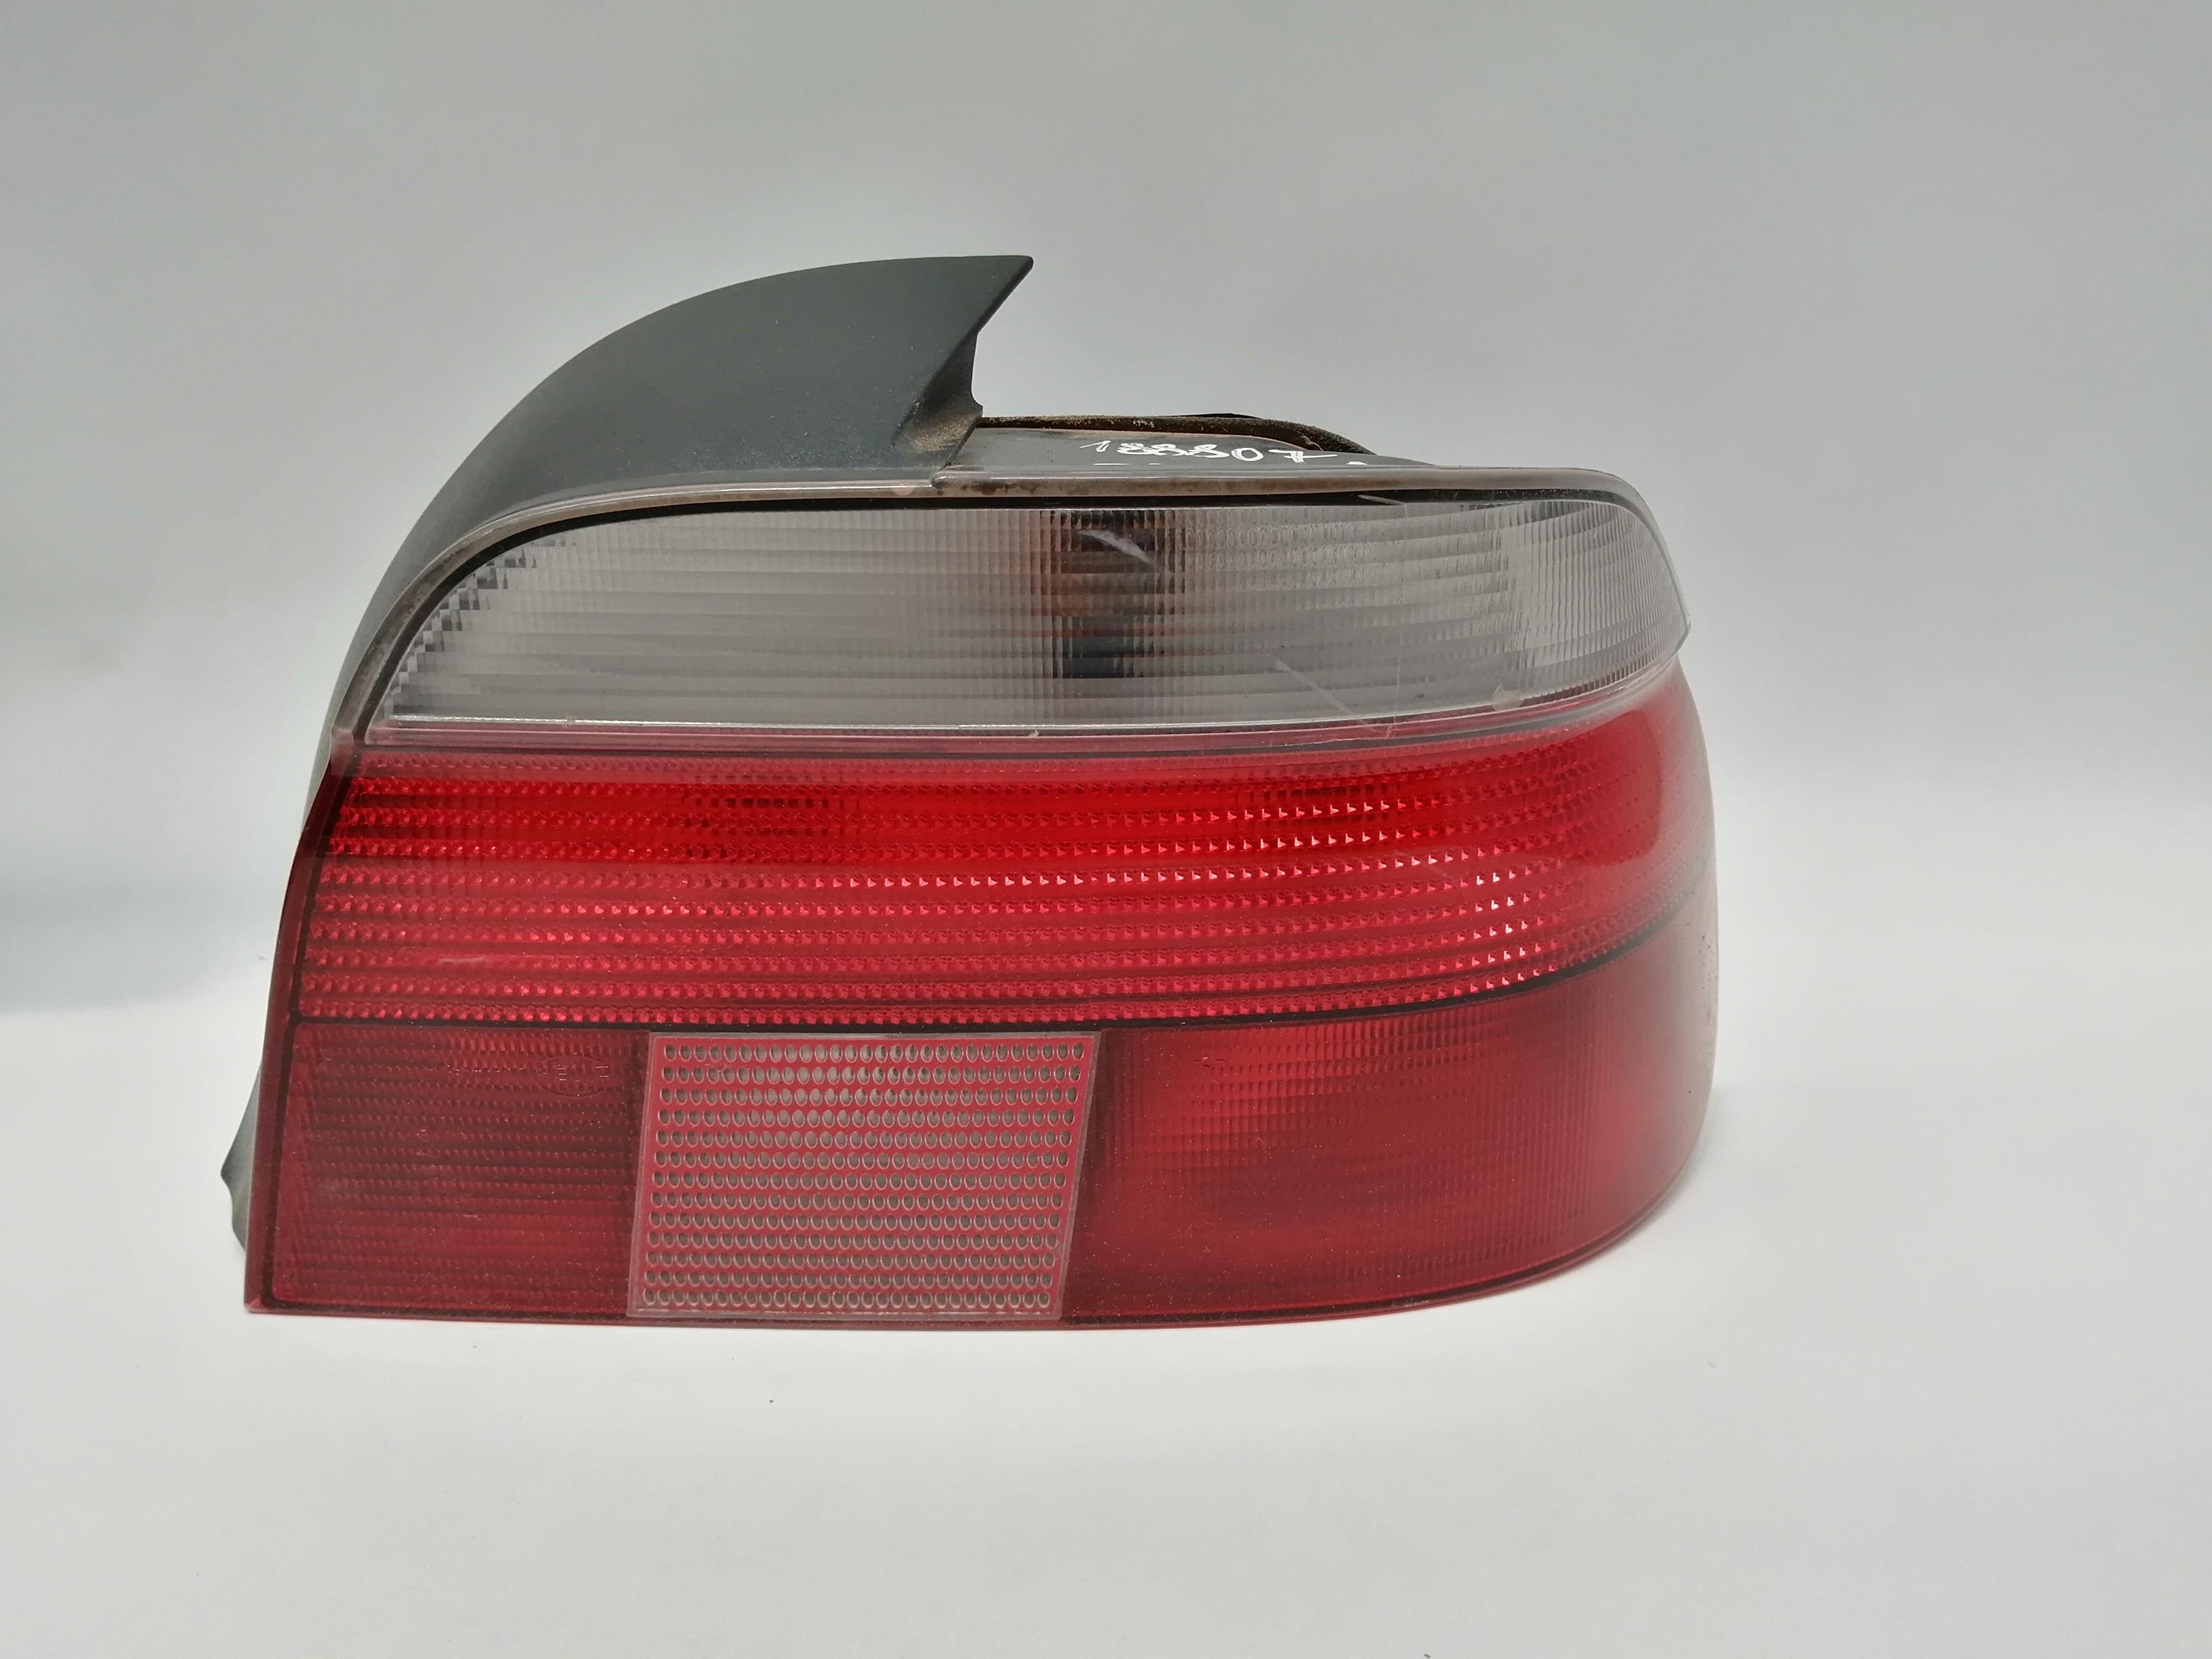 BMW 5 Series E39 (1995-2004) Rear Right Taillight Lamp 63218363558 25196814